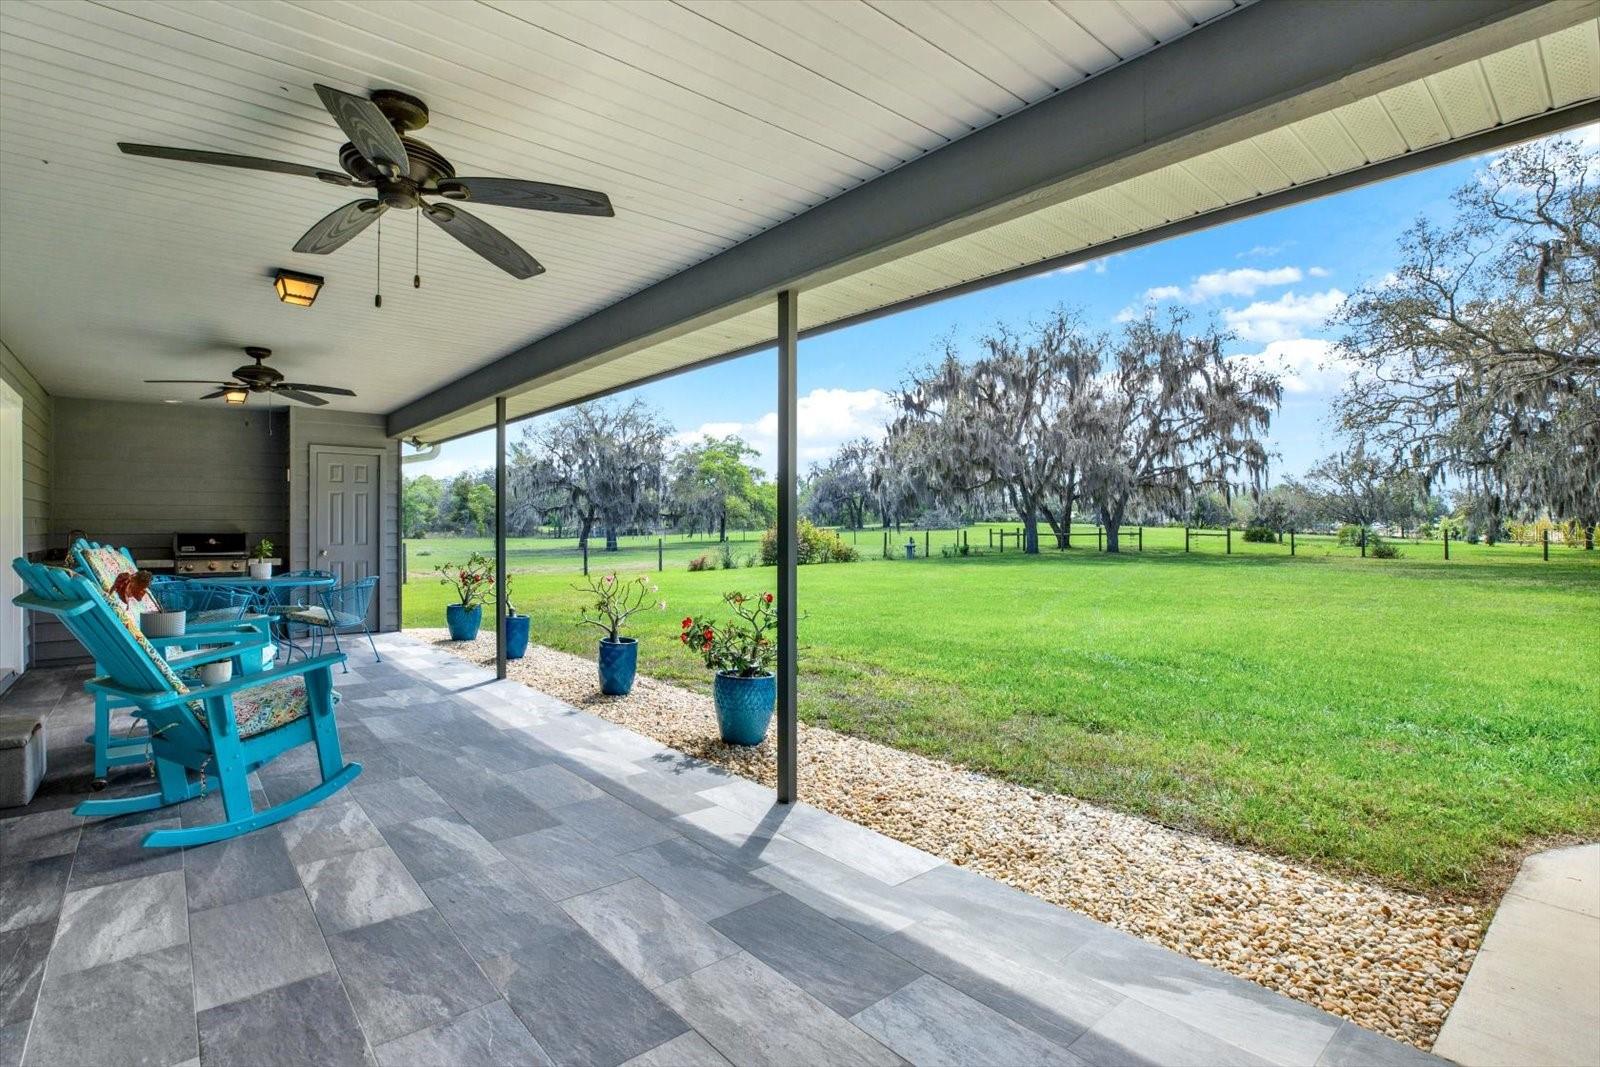 Covered Patio overlooking Landscaped Yard